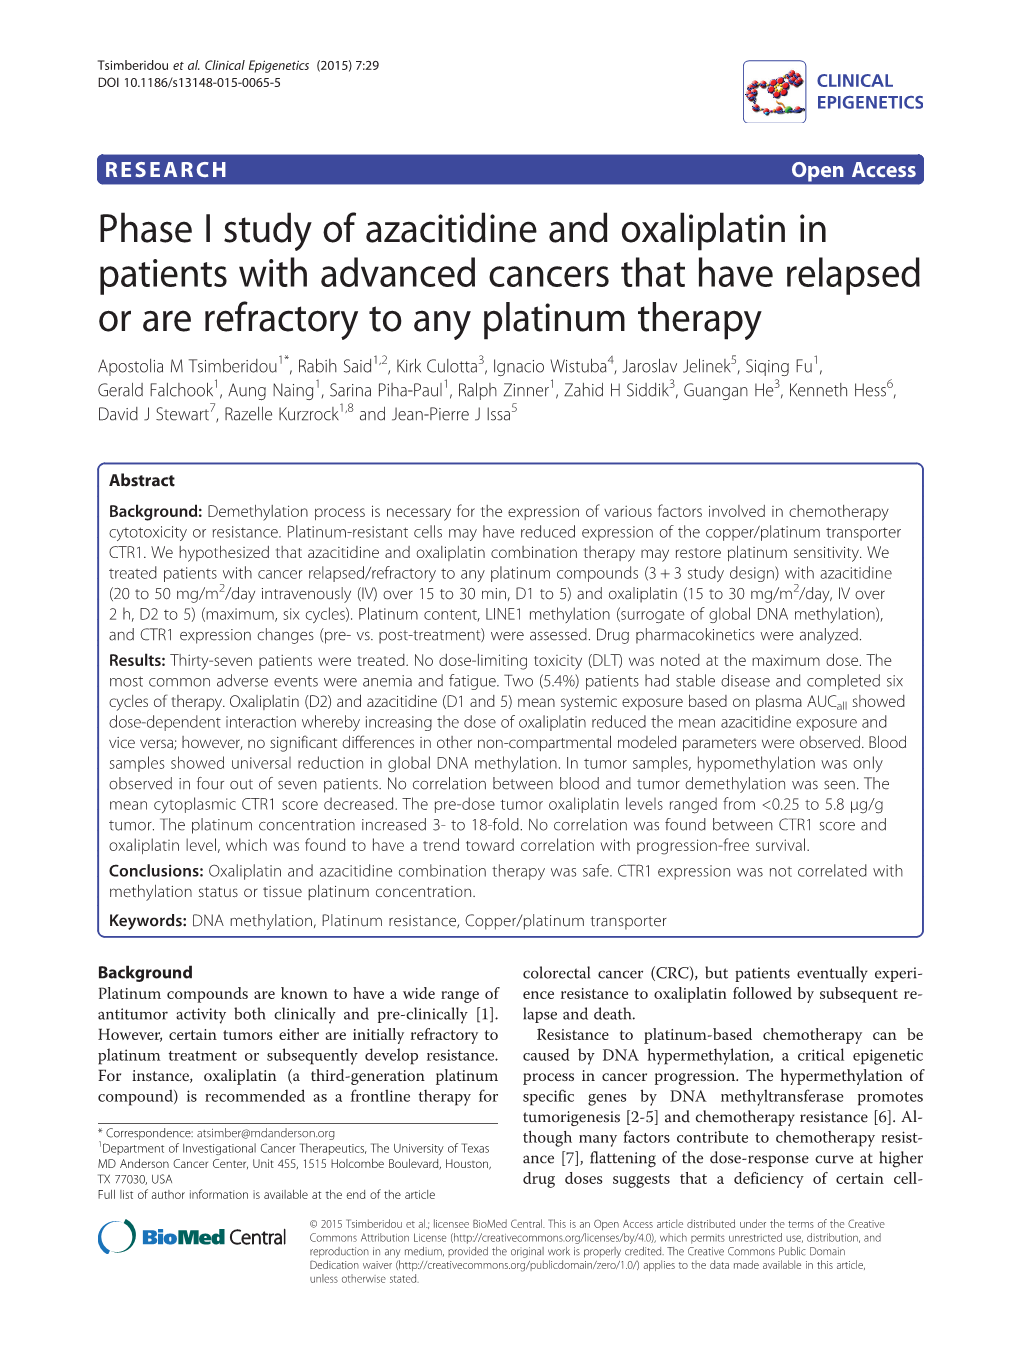 Phase I Study of Azacitidine and Oxaliplatin in Patients with Advanced Cancers That Have Relapsed Or Are Refractory to Any Plati